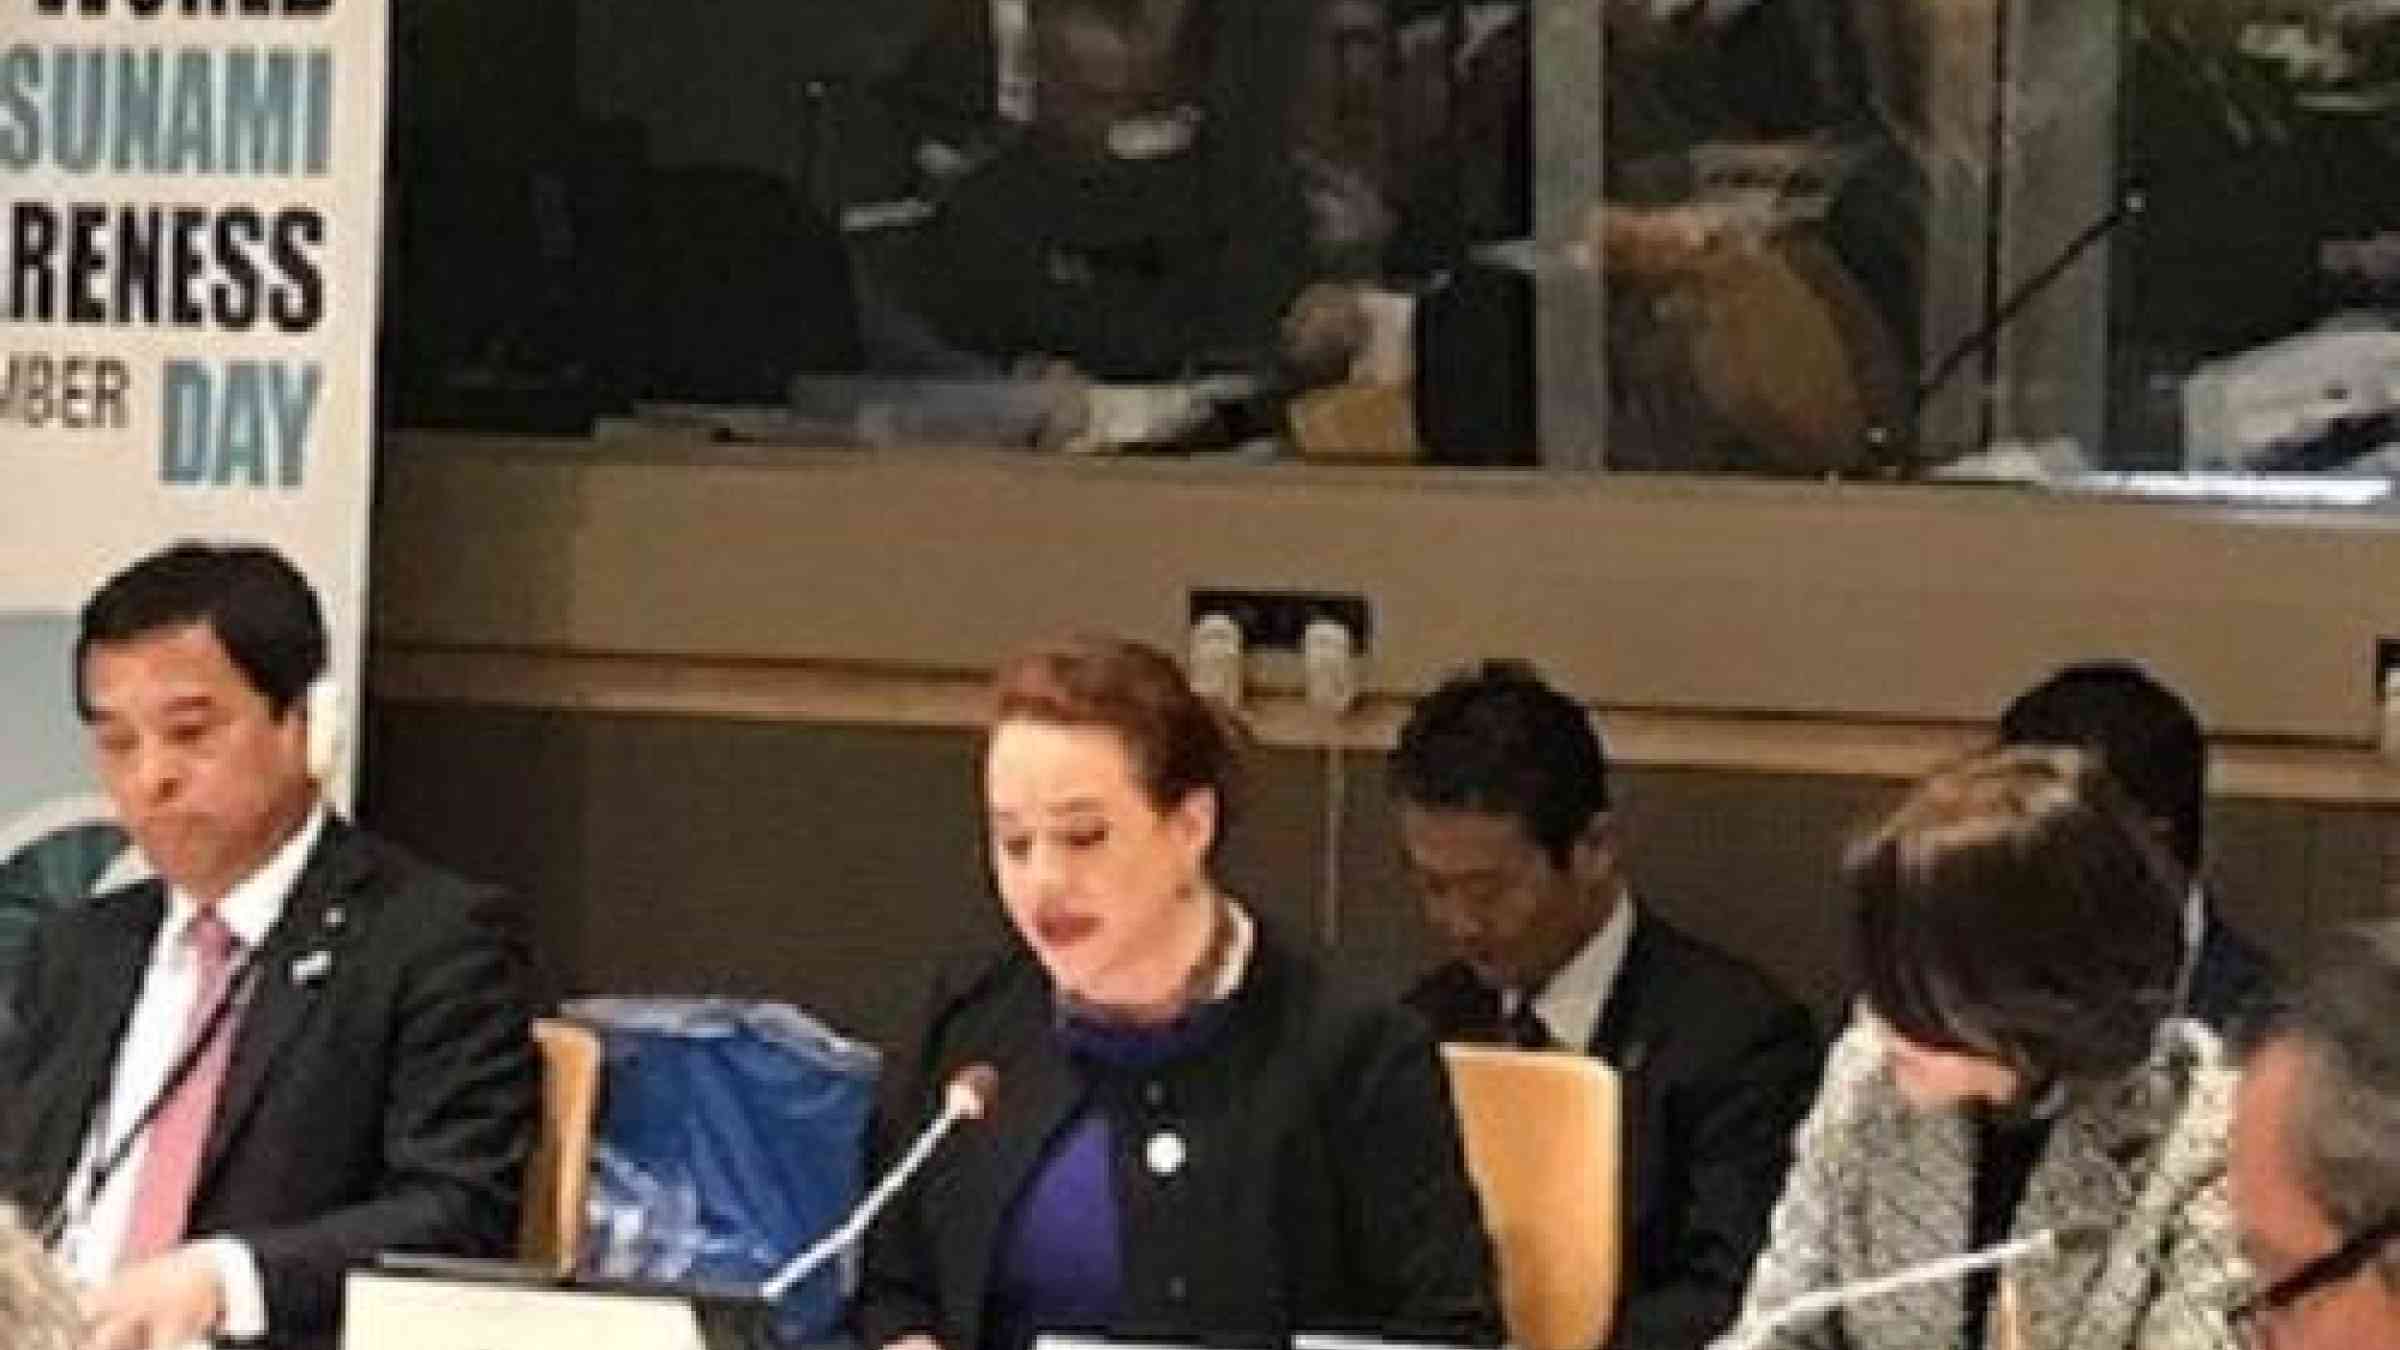 María Fernanda Espinosa Garcés, President of the UN General Assembly, opening the tsunami panel discussion at UN HQ in New York.